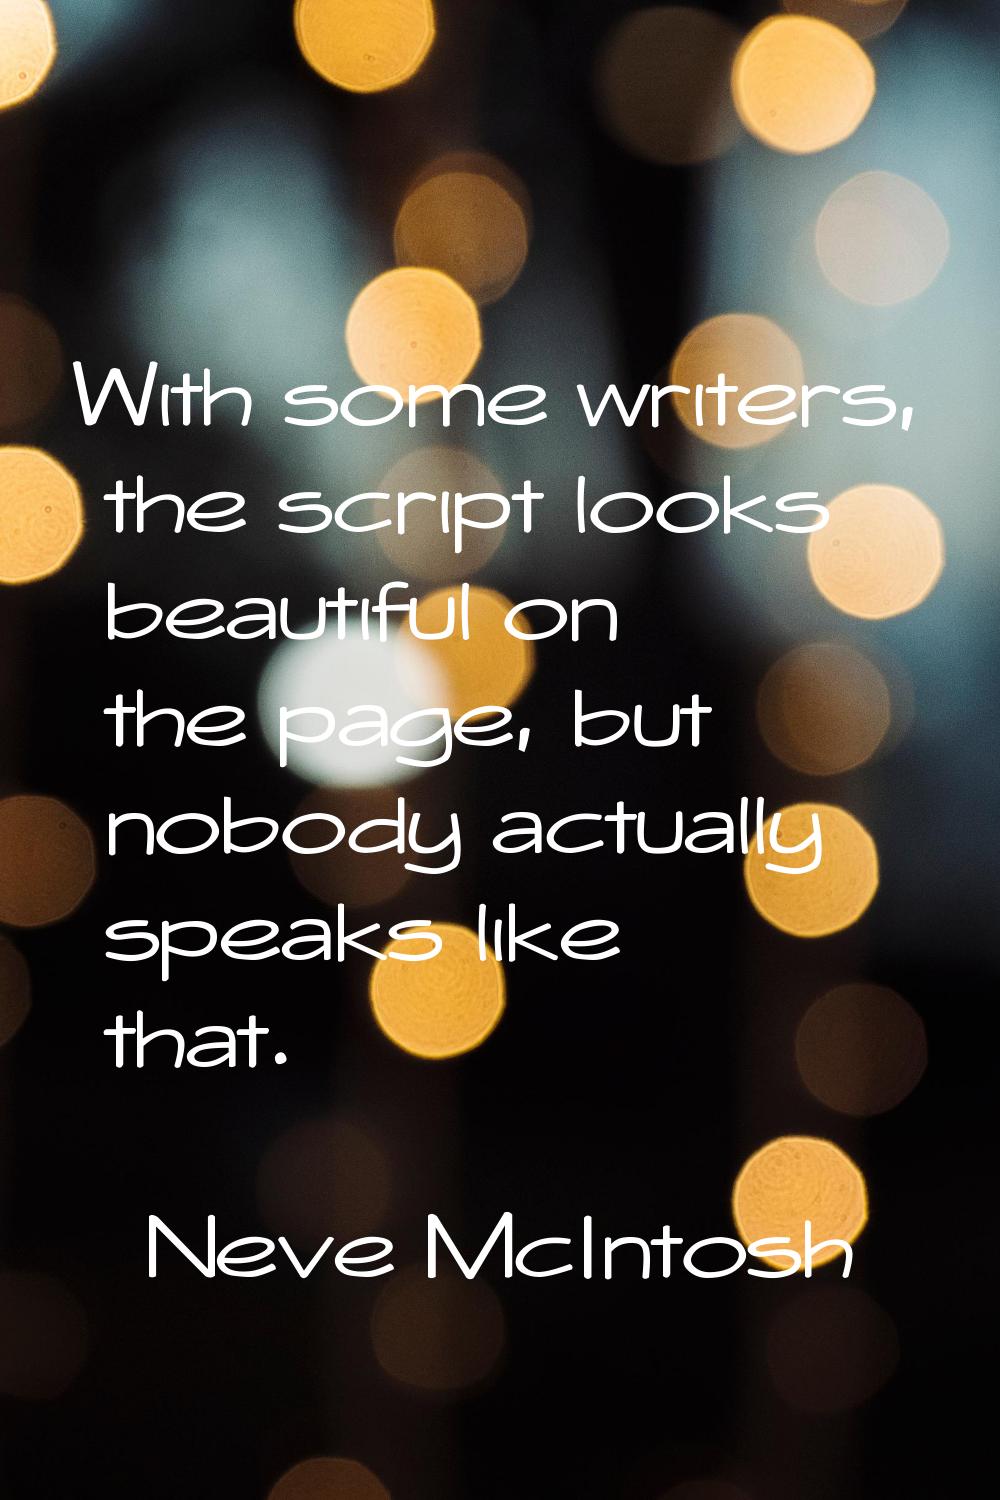 With some writers, the script looks beautiful on the page, but nobody actually speaks like that.